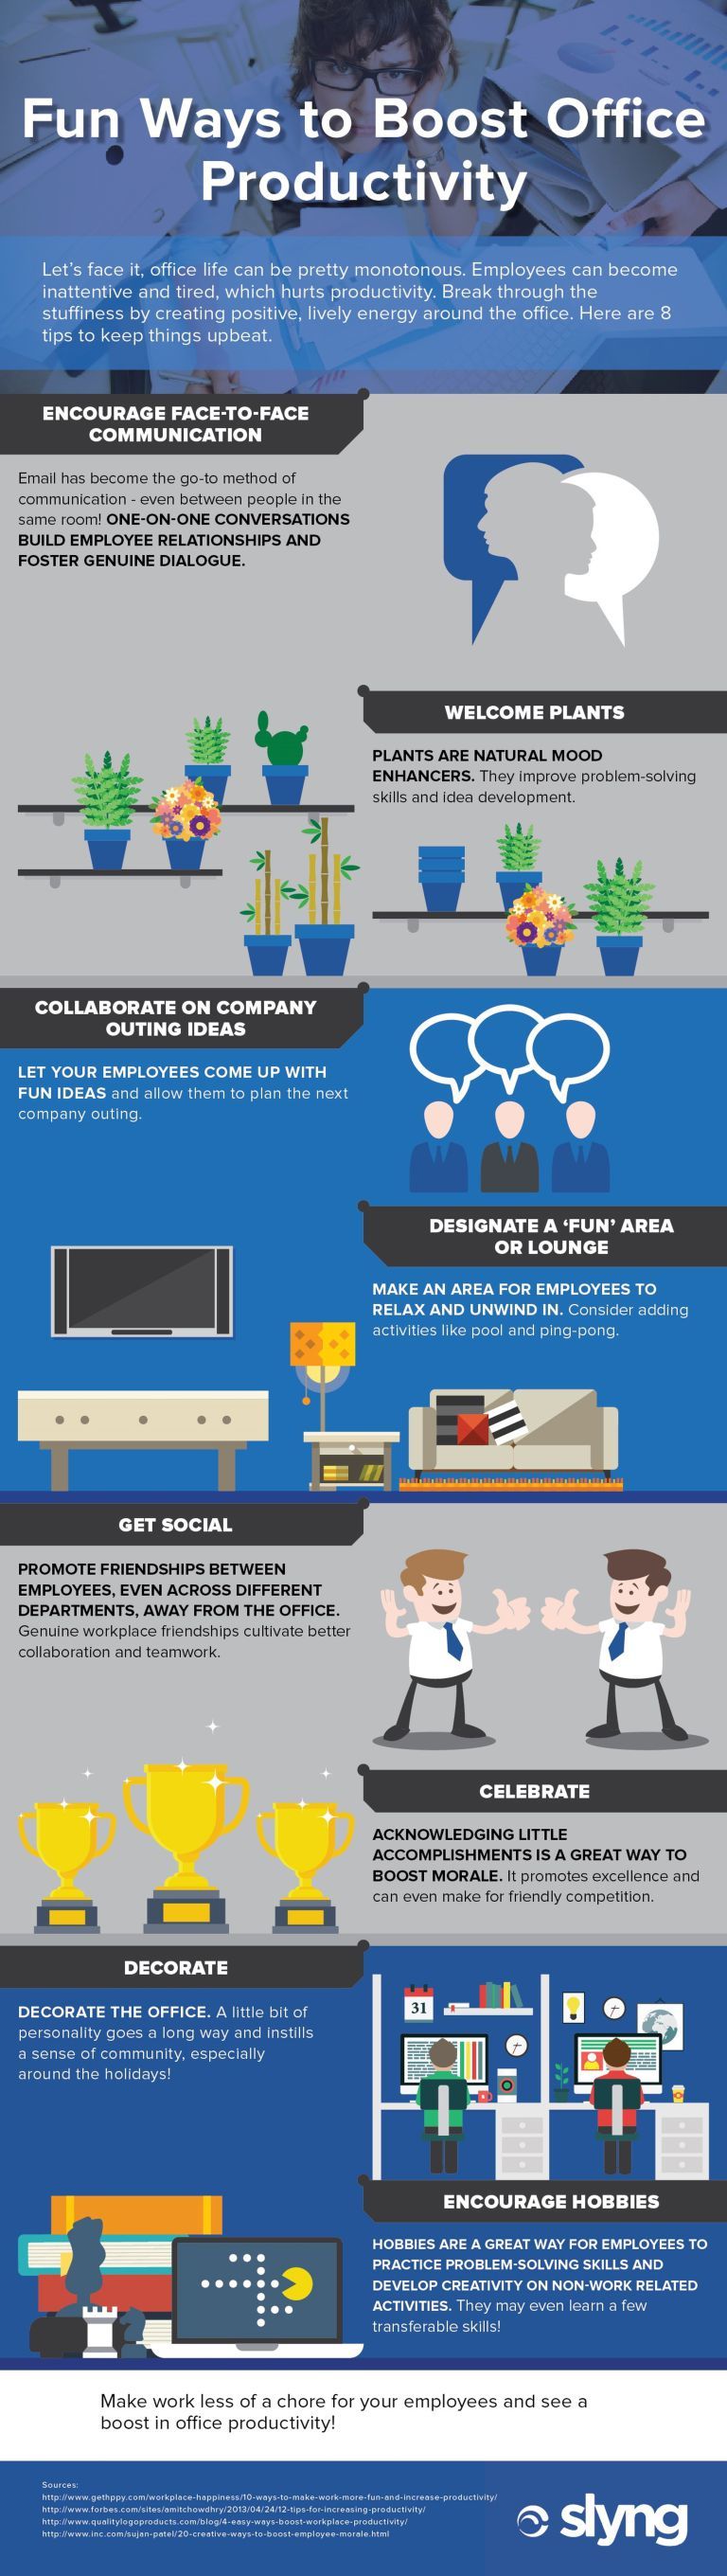 Fun Ways to Boost Office Productivity Infographic